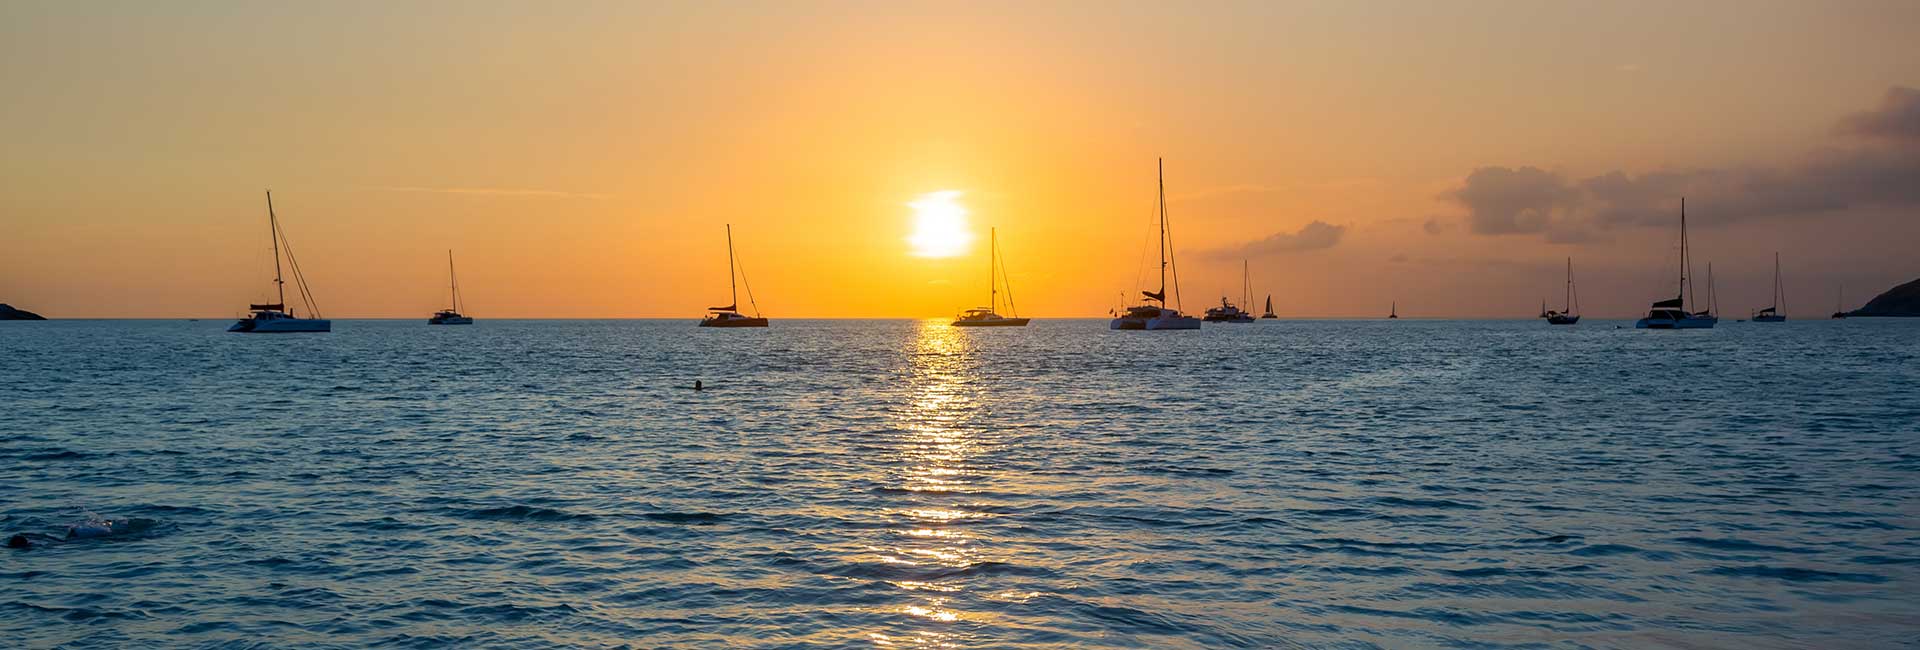 yachts in sunset